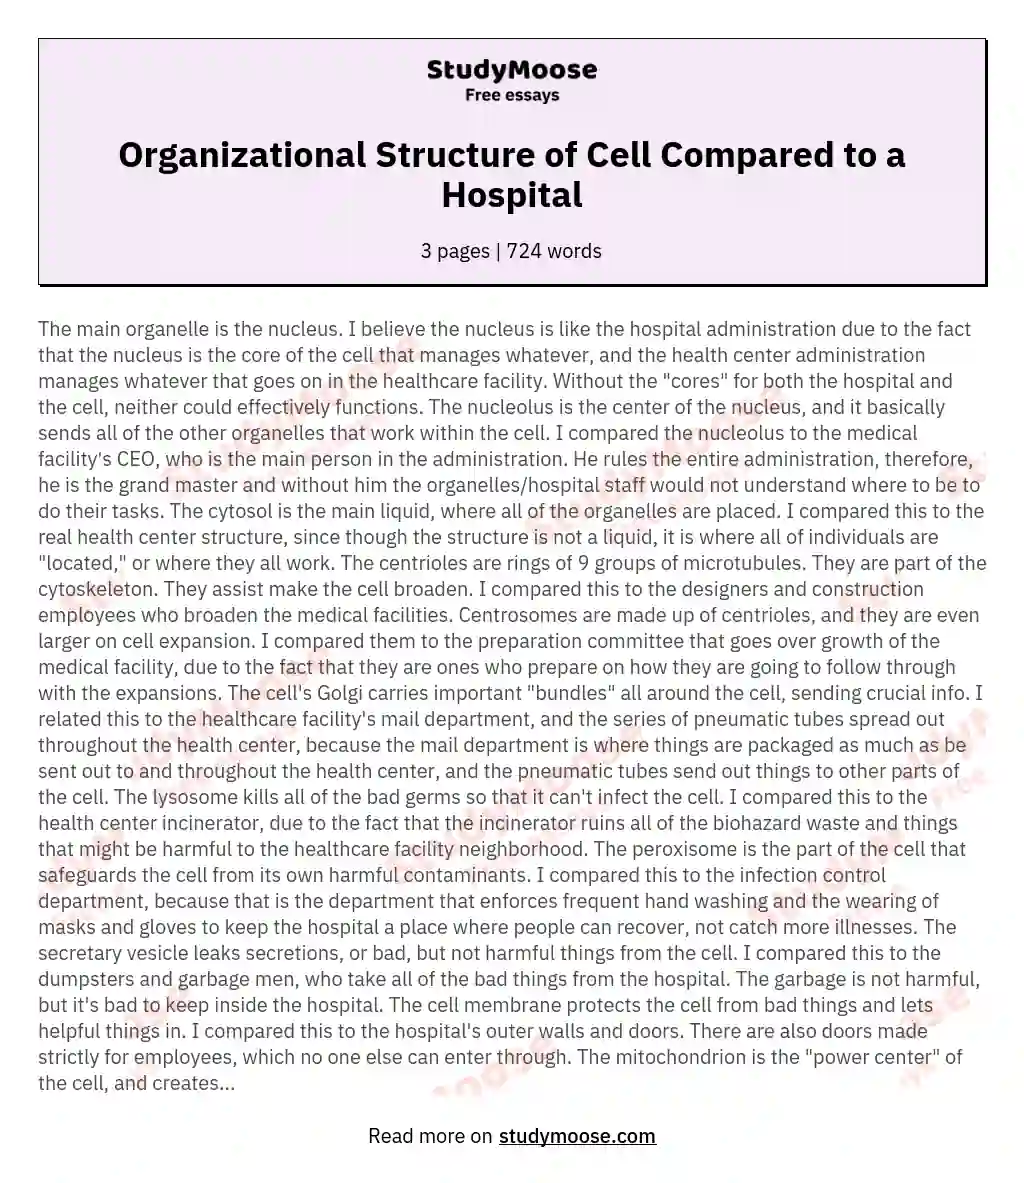 Organizational Structure of Cell Compared to a Hospital essay